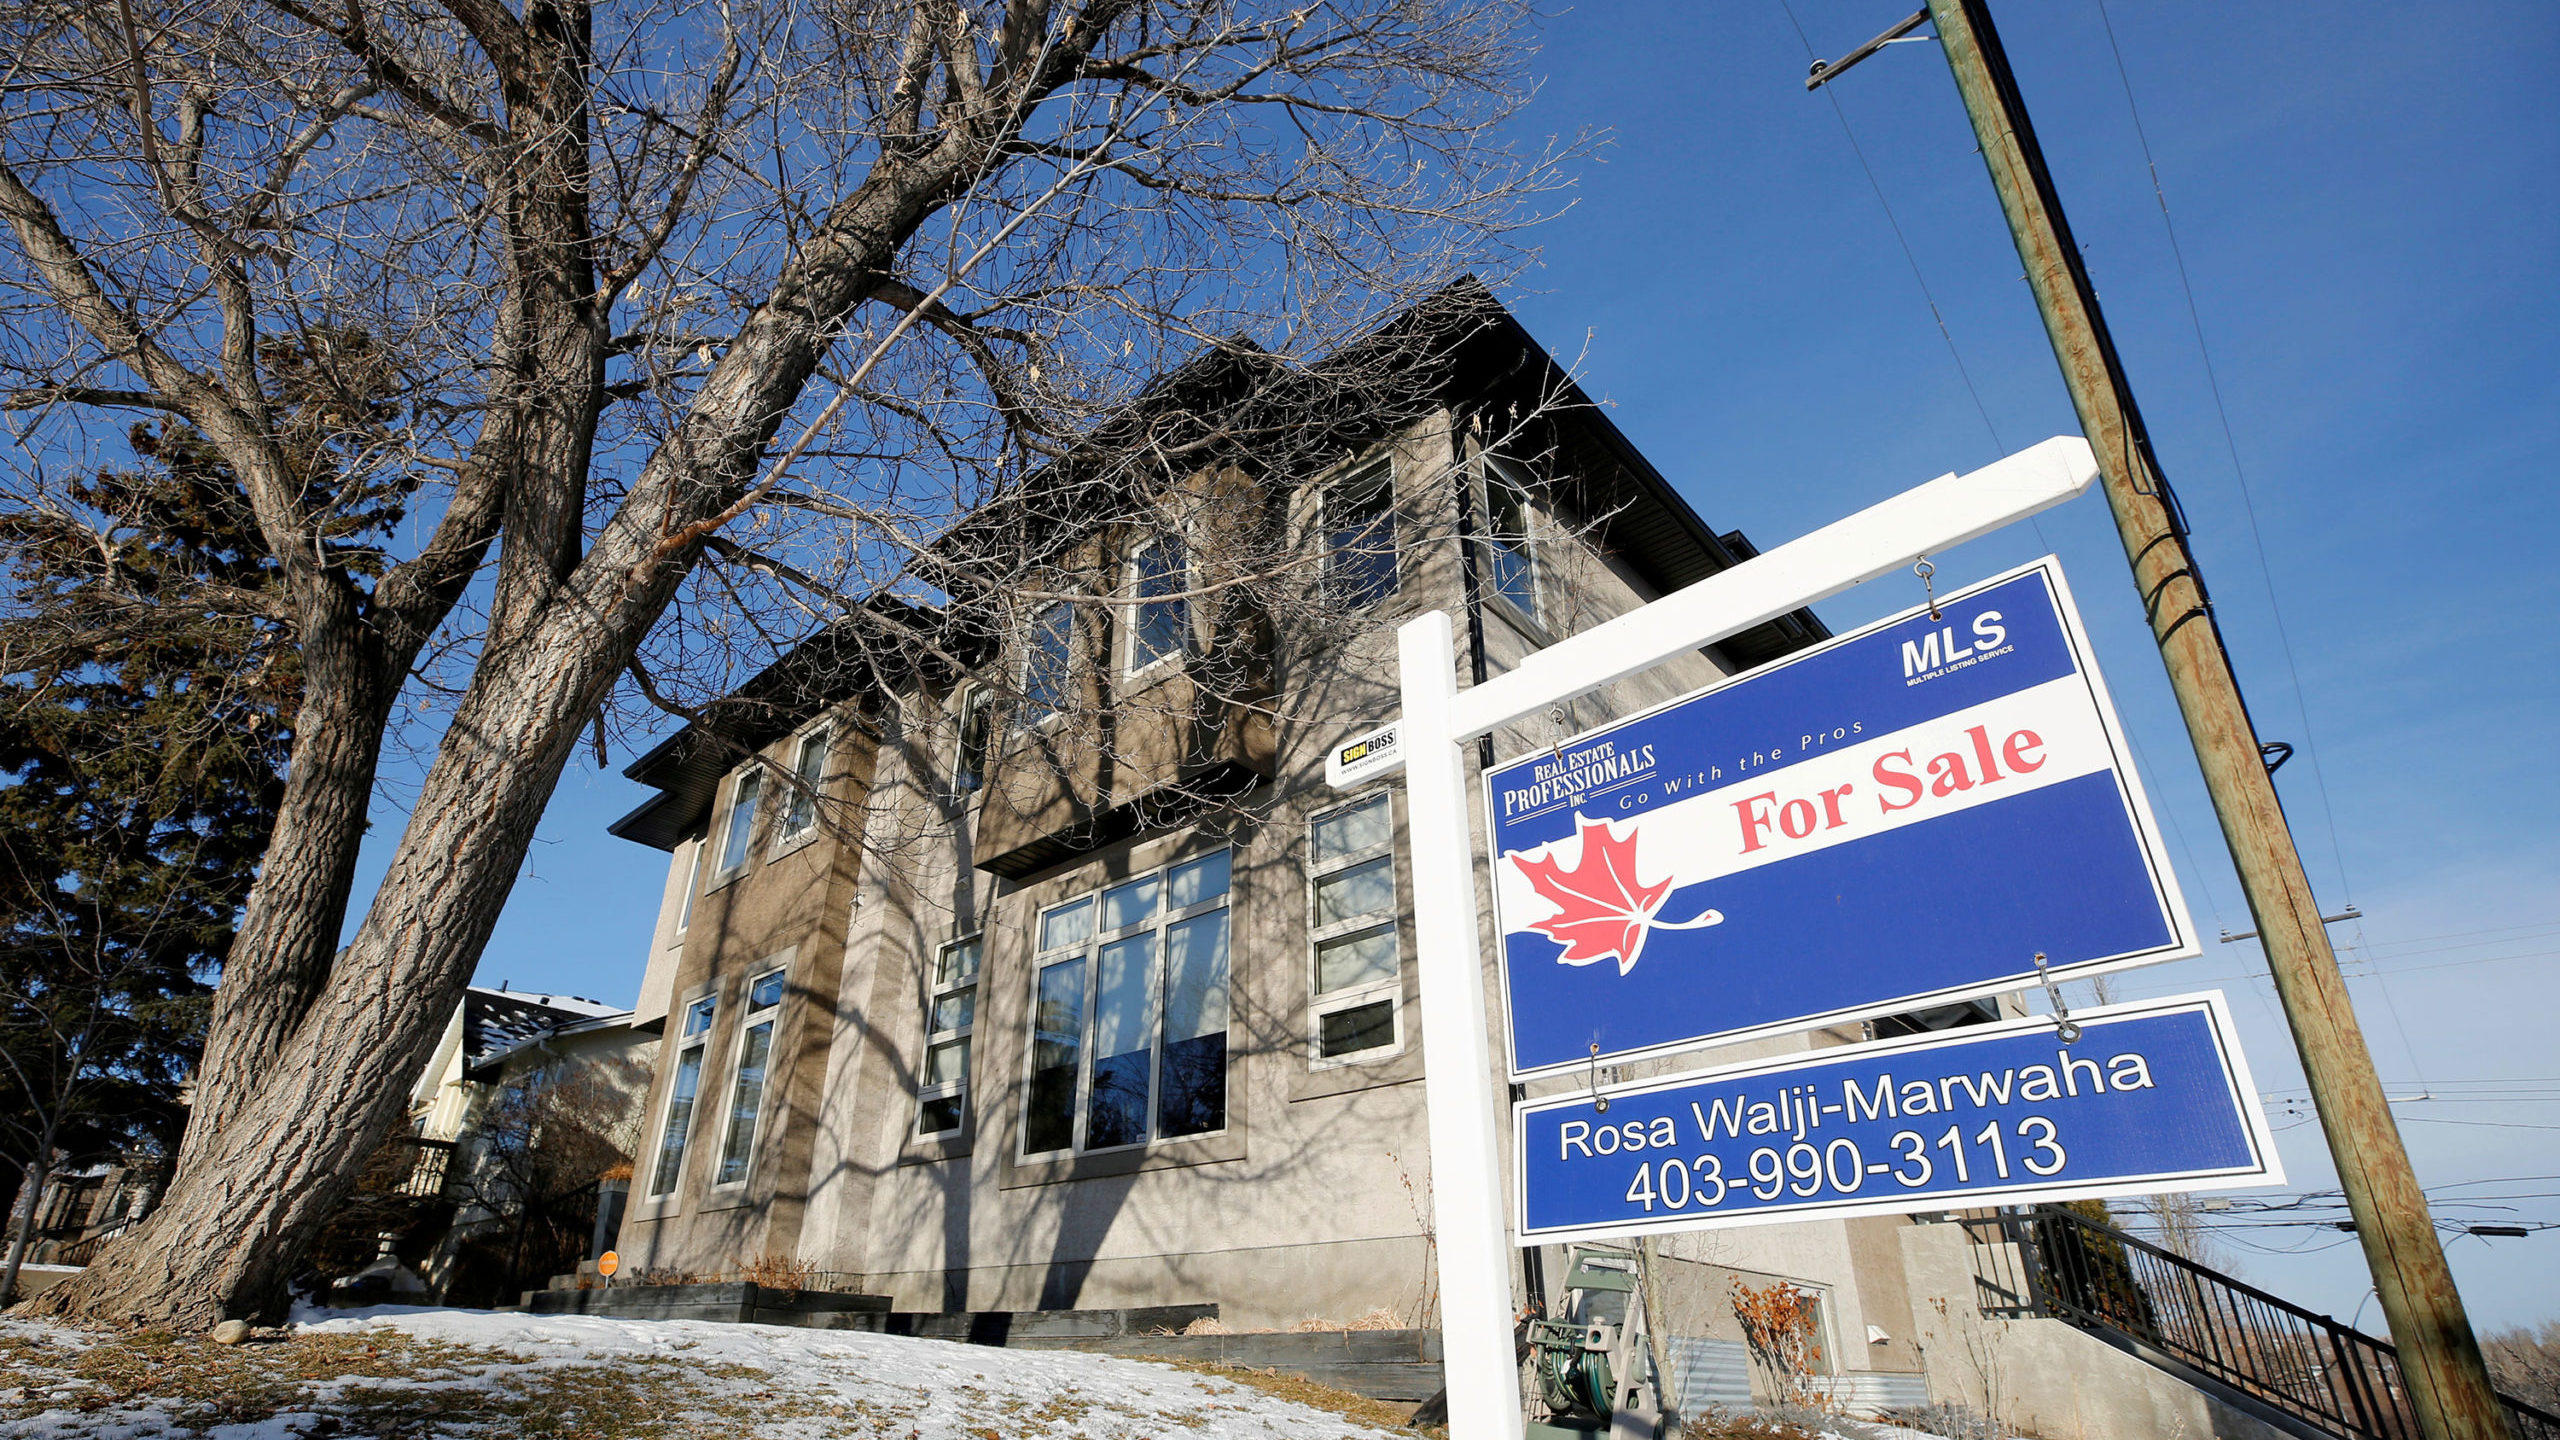 A new Canadian law took effect January 1 that essentially bans foreign buyers from buying residenti...